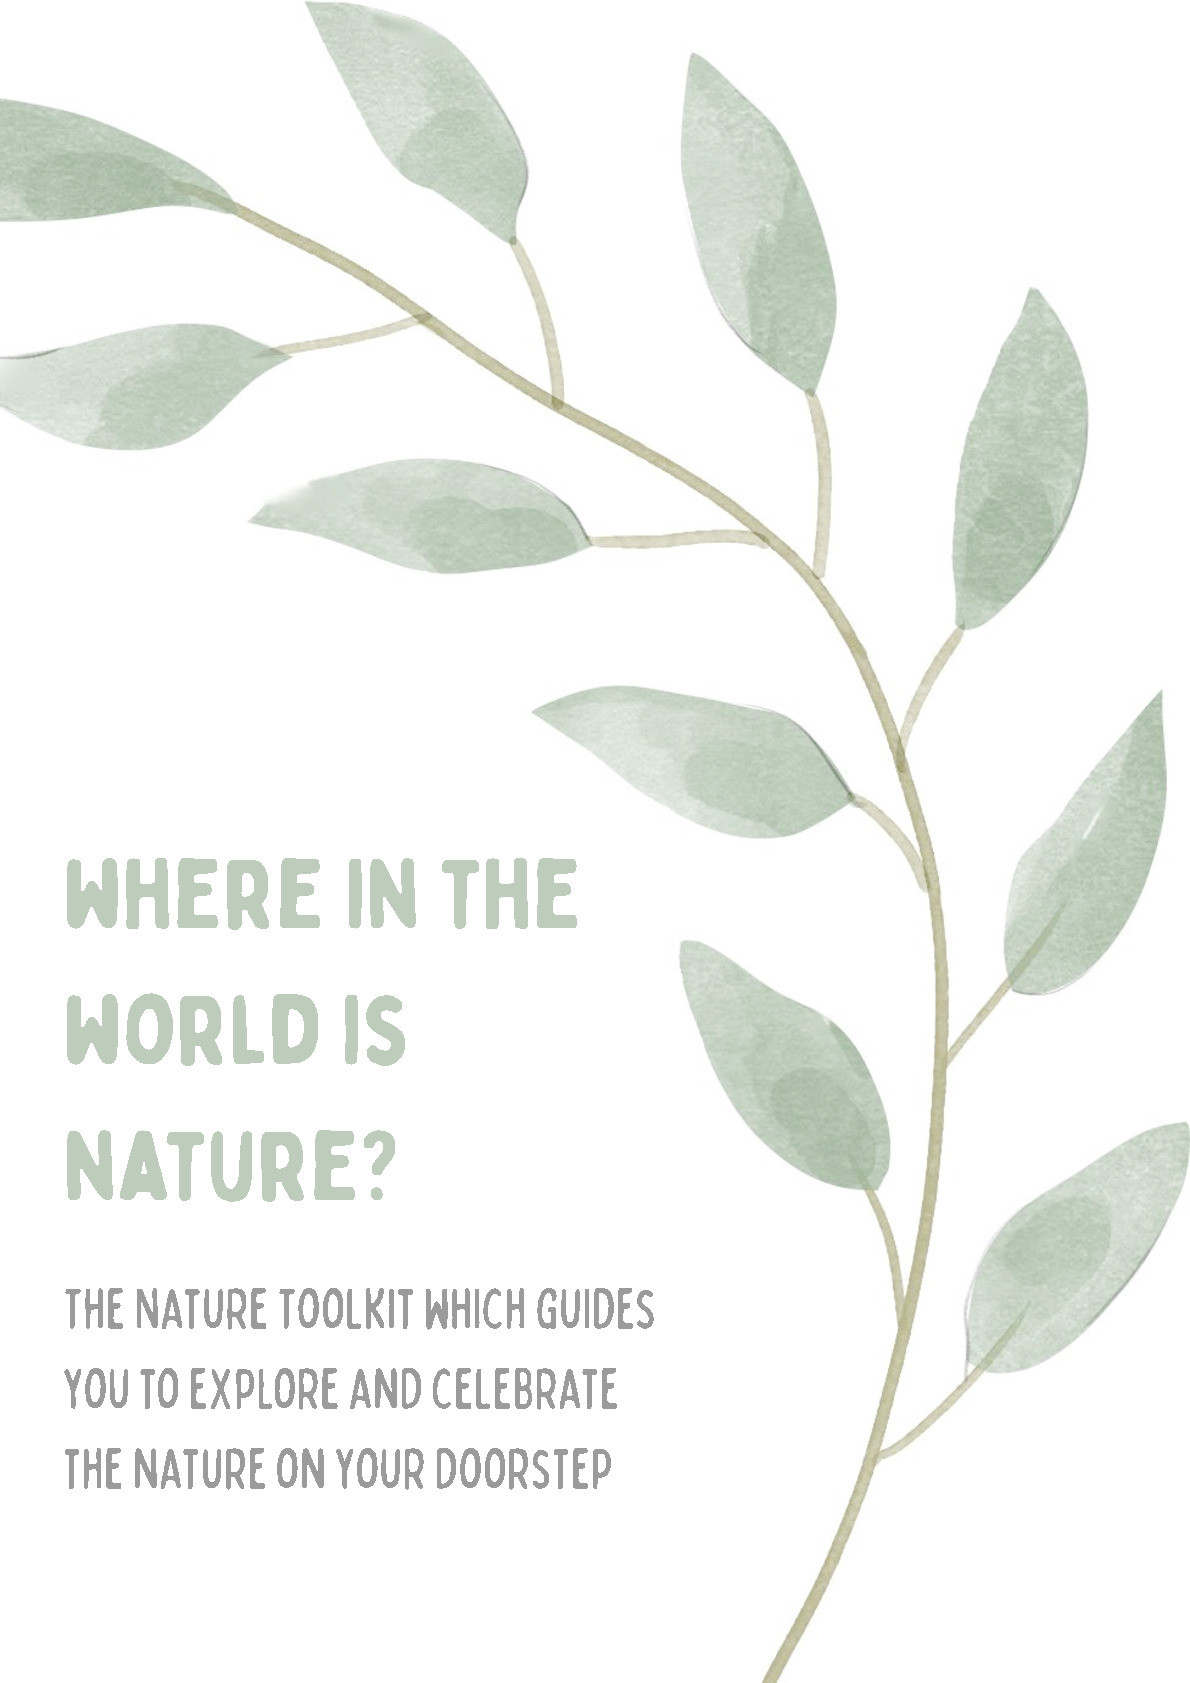 The alternative nature toolkit: Where in the world is nature? Thumbnail